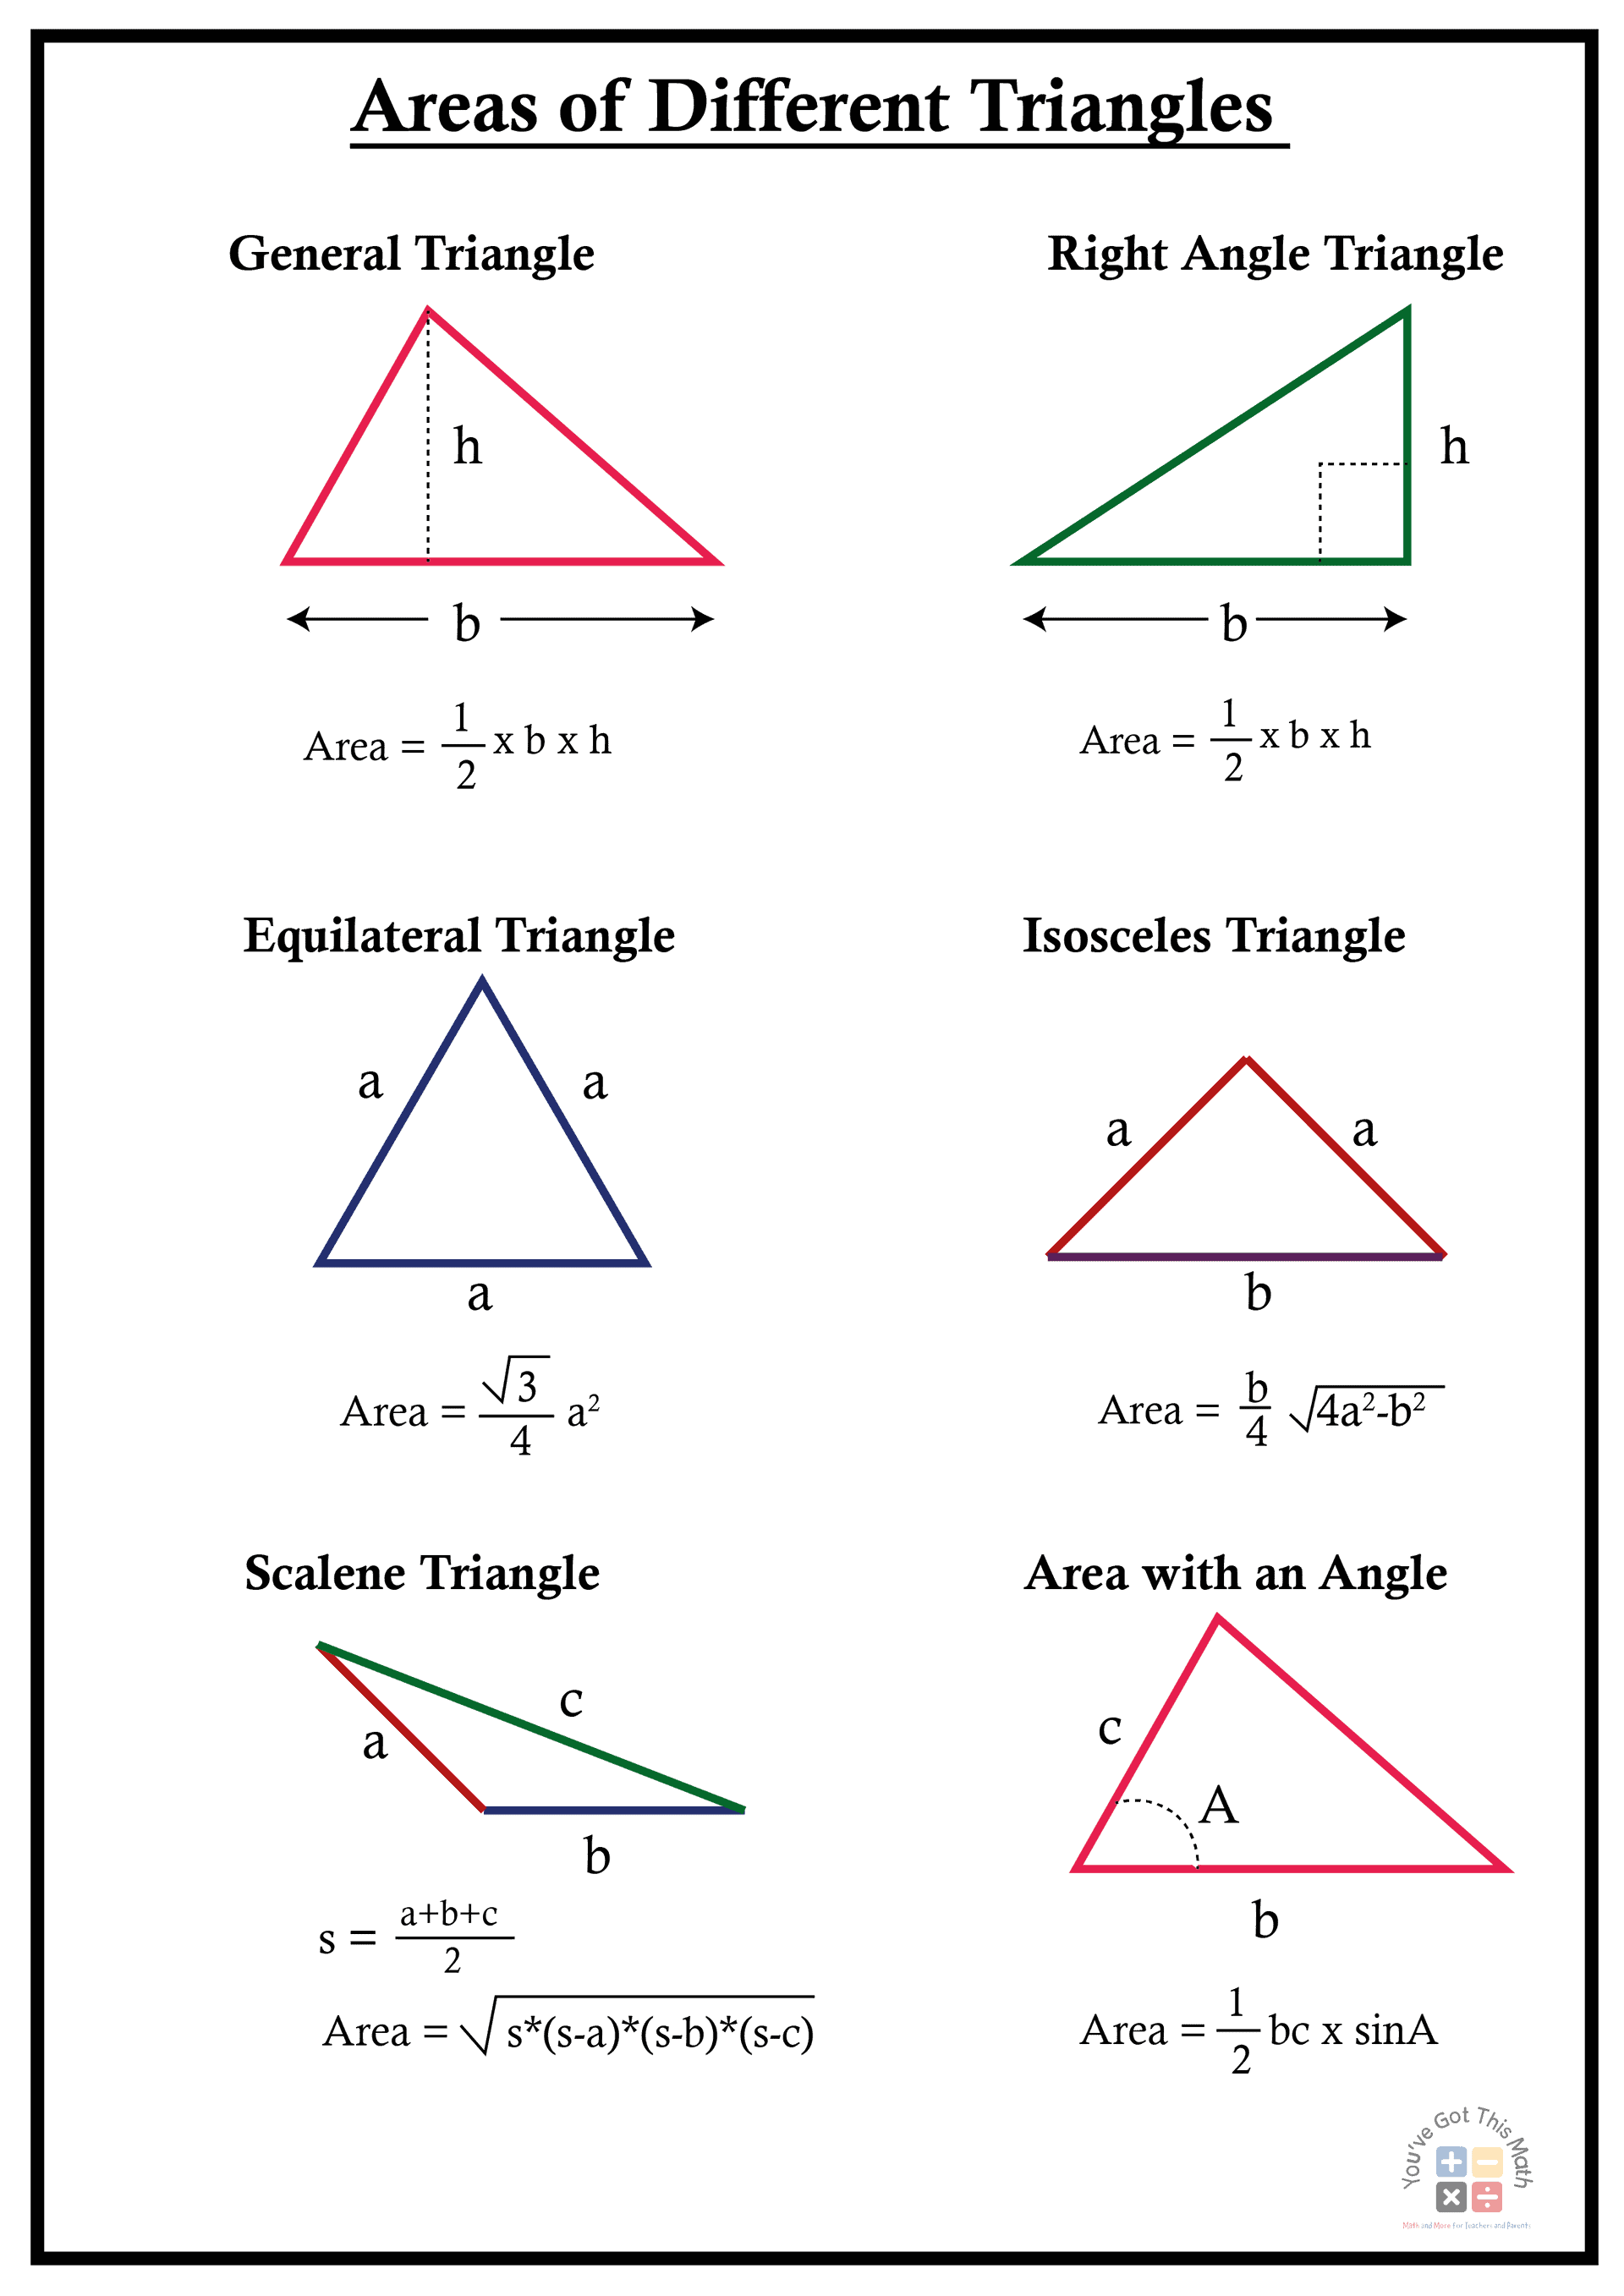 12 Free Area of a Triangle Worksheets | 80+ Area Problems